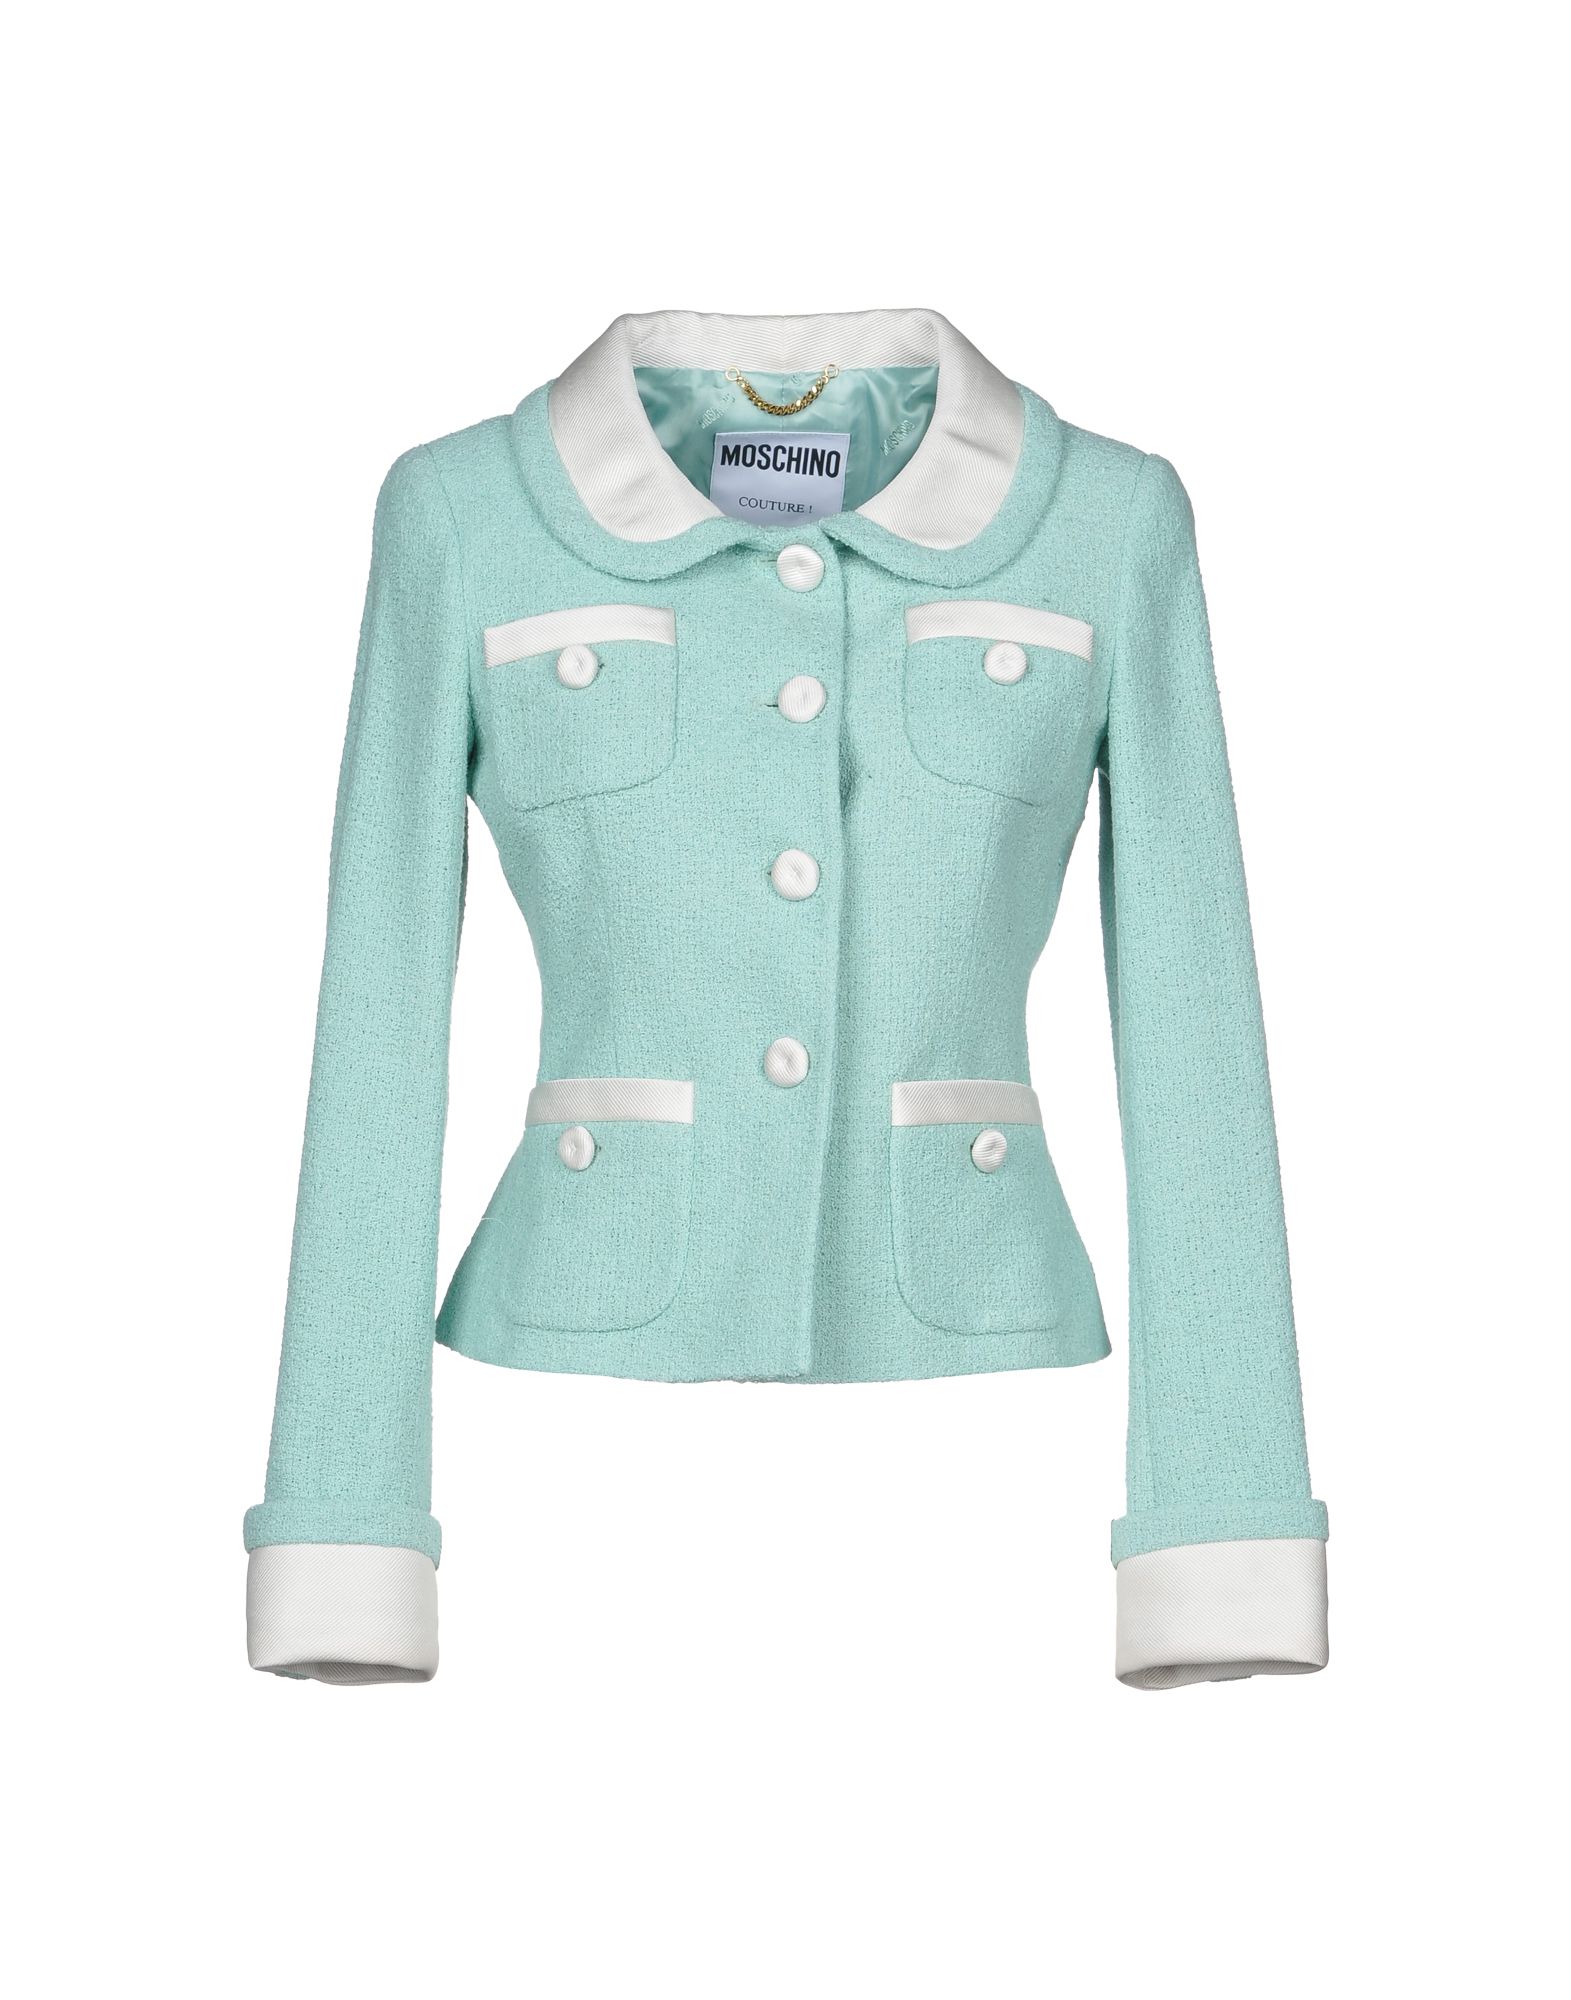 MOSCHINO SUIT JACKETS,49371280ES 6